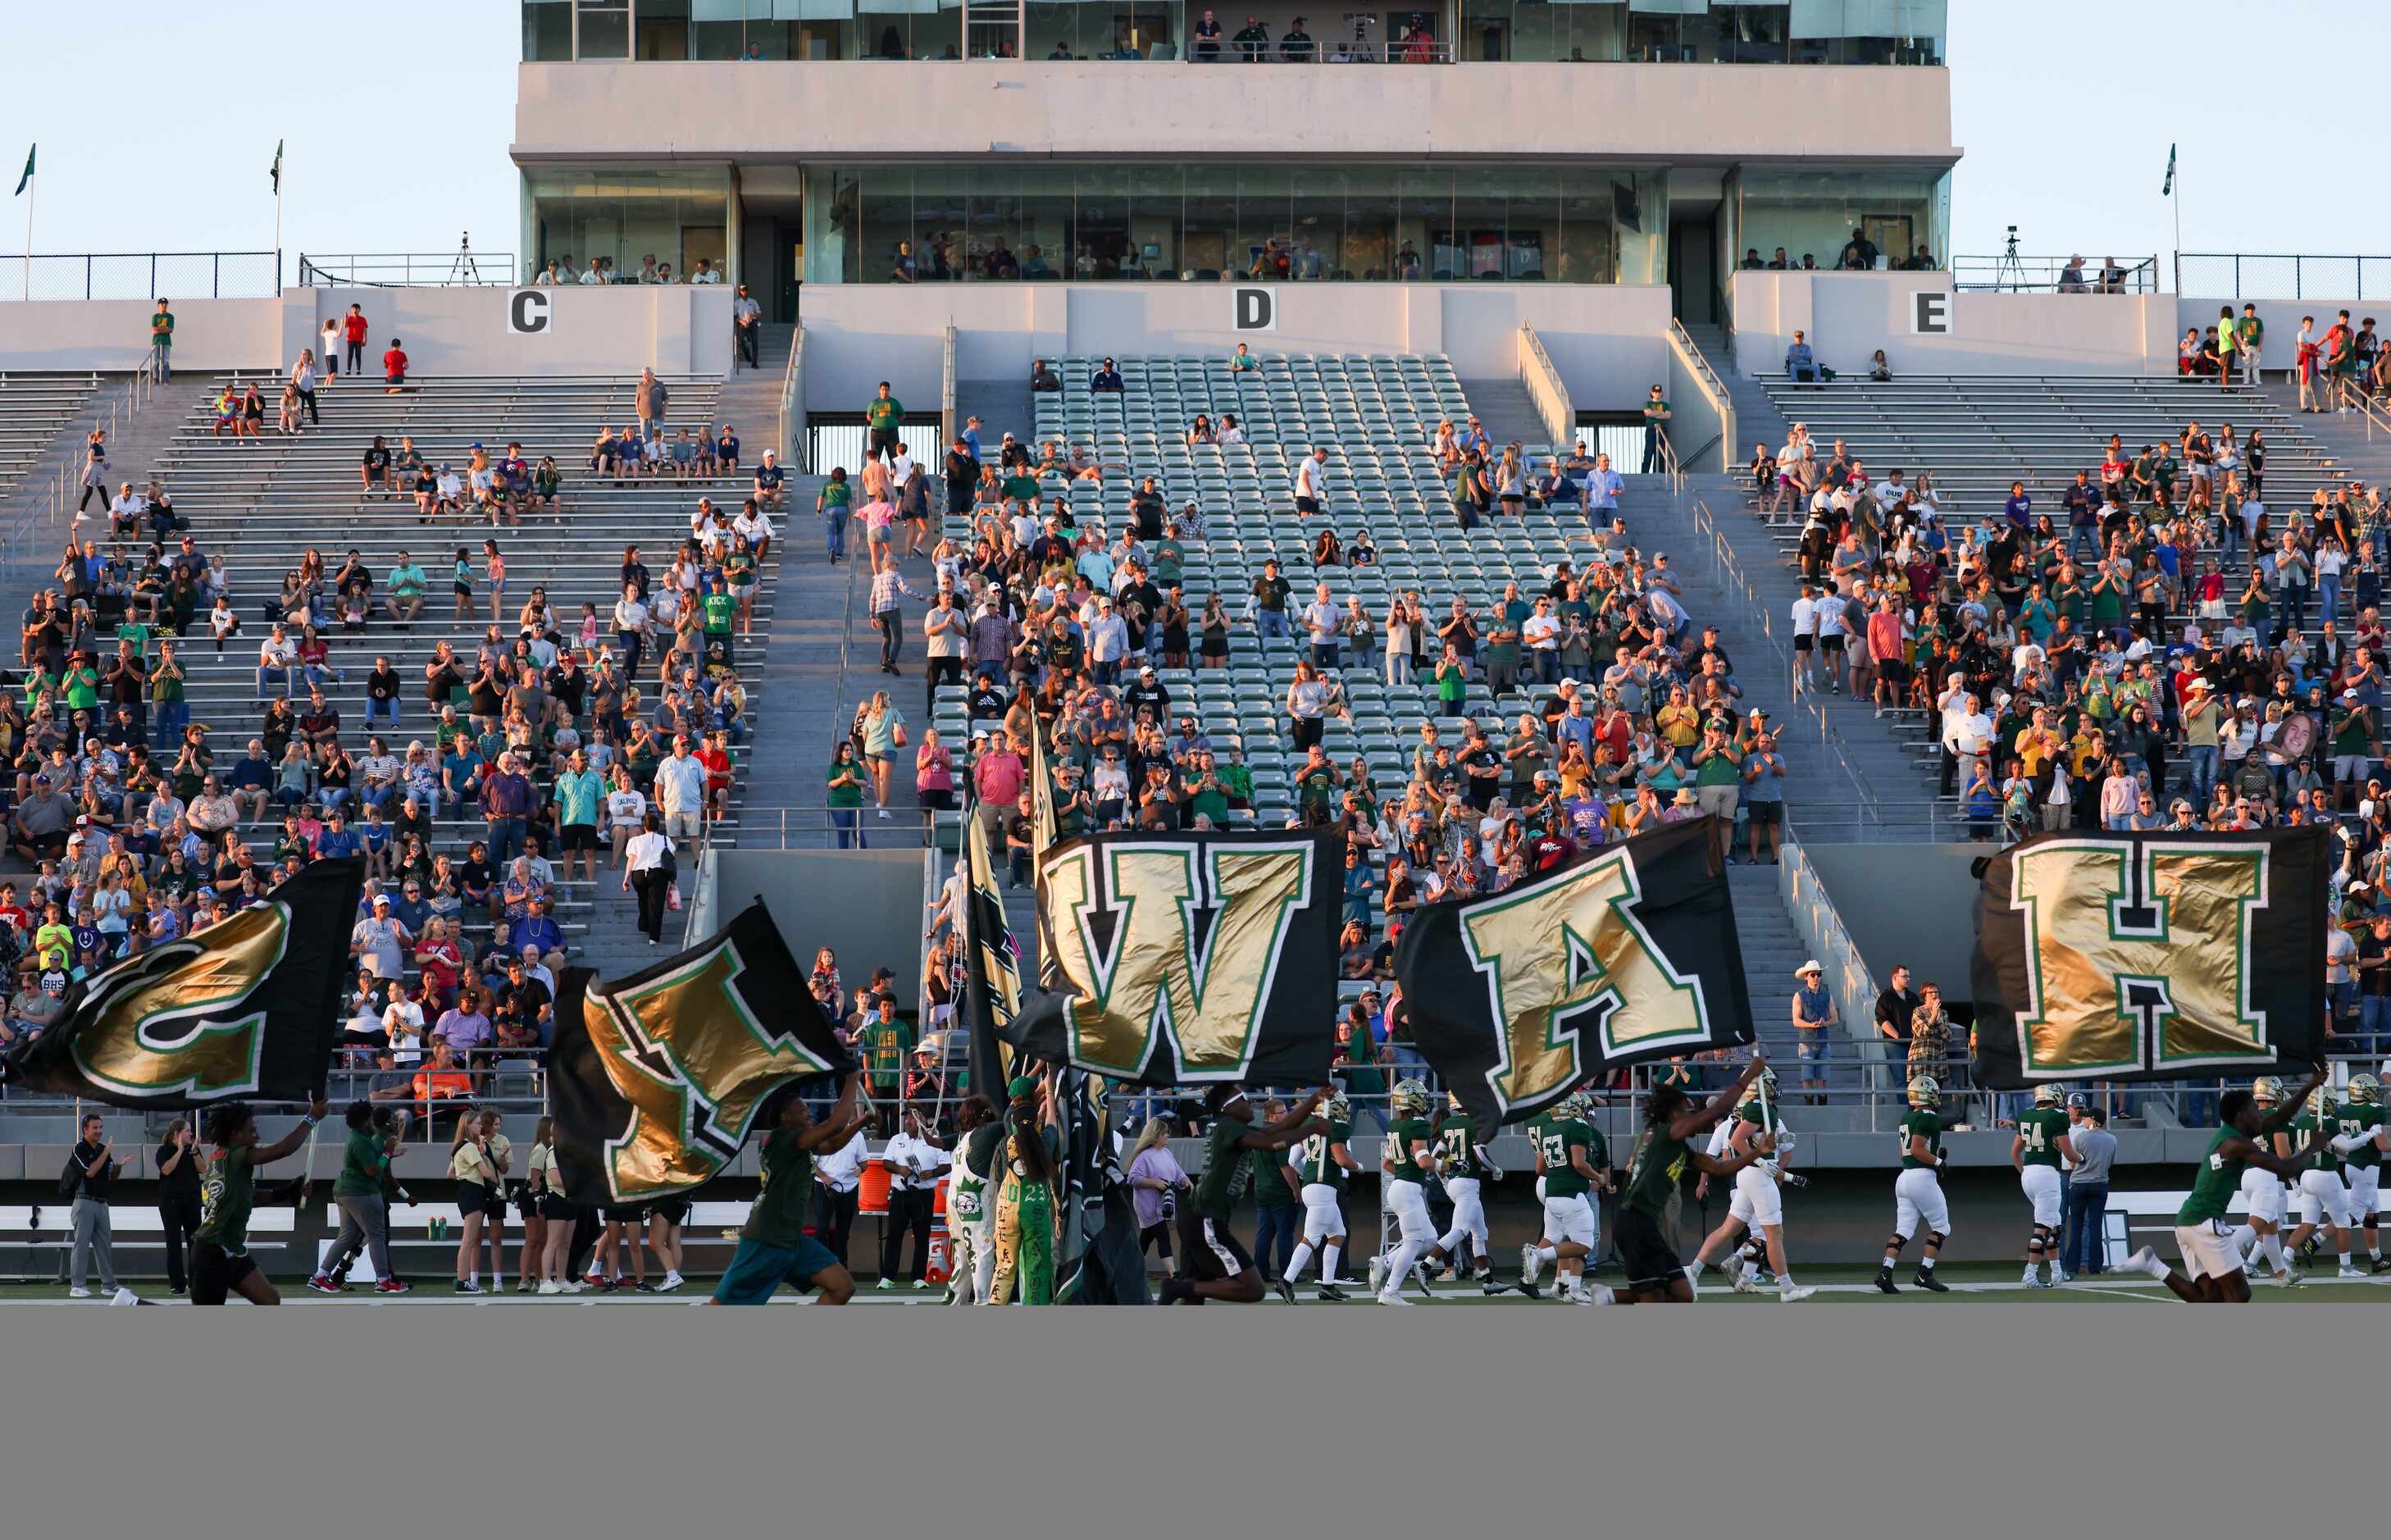 The Birdville Hawks enter the field before a game against Mansfield Timberview at the...